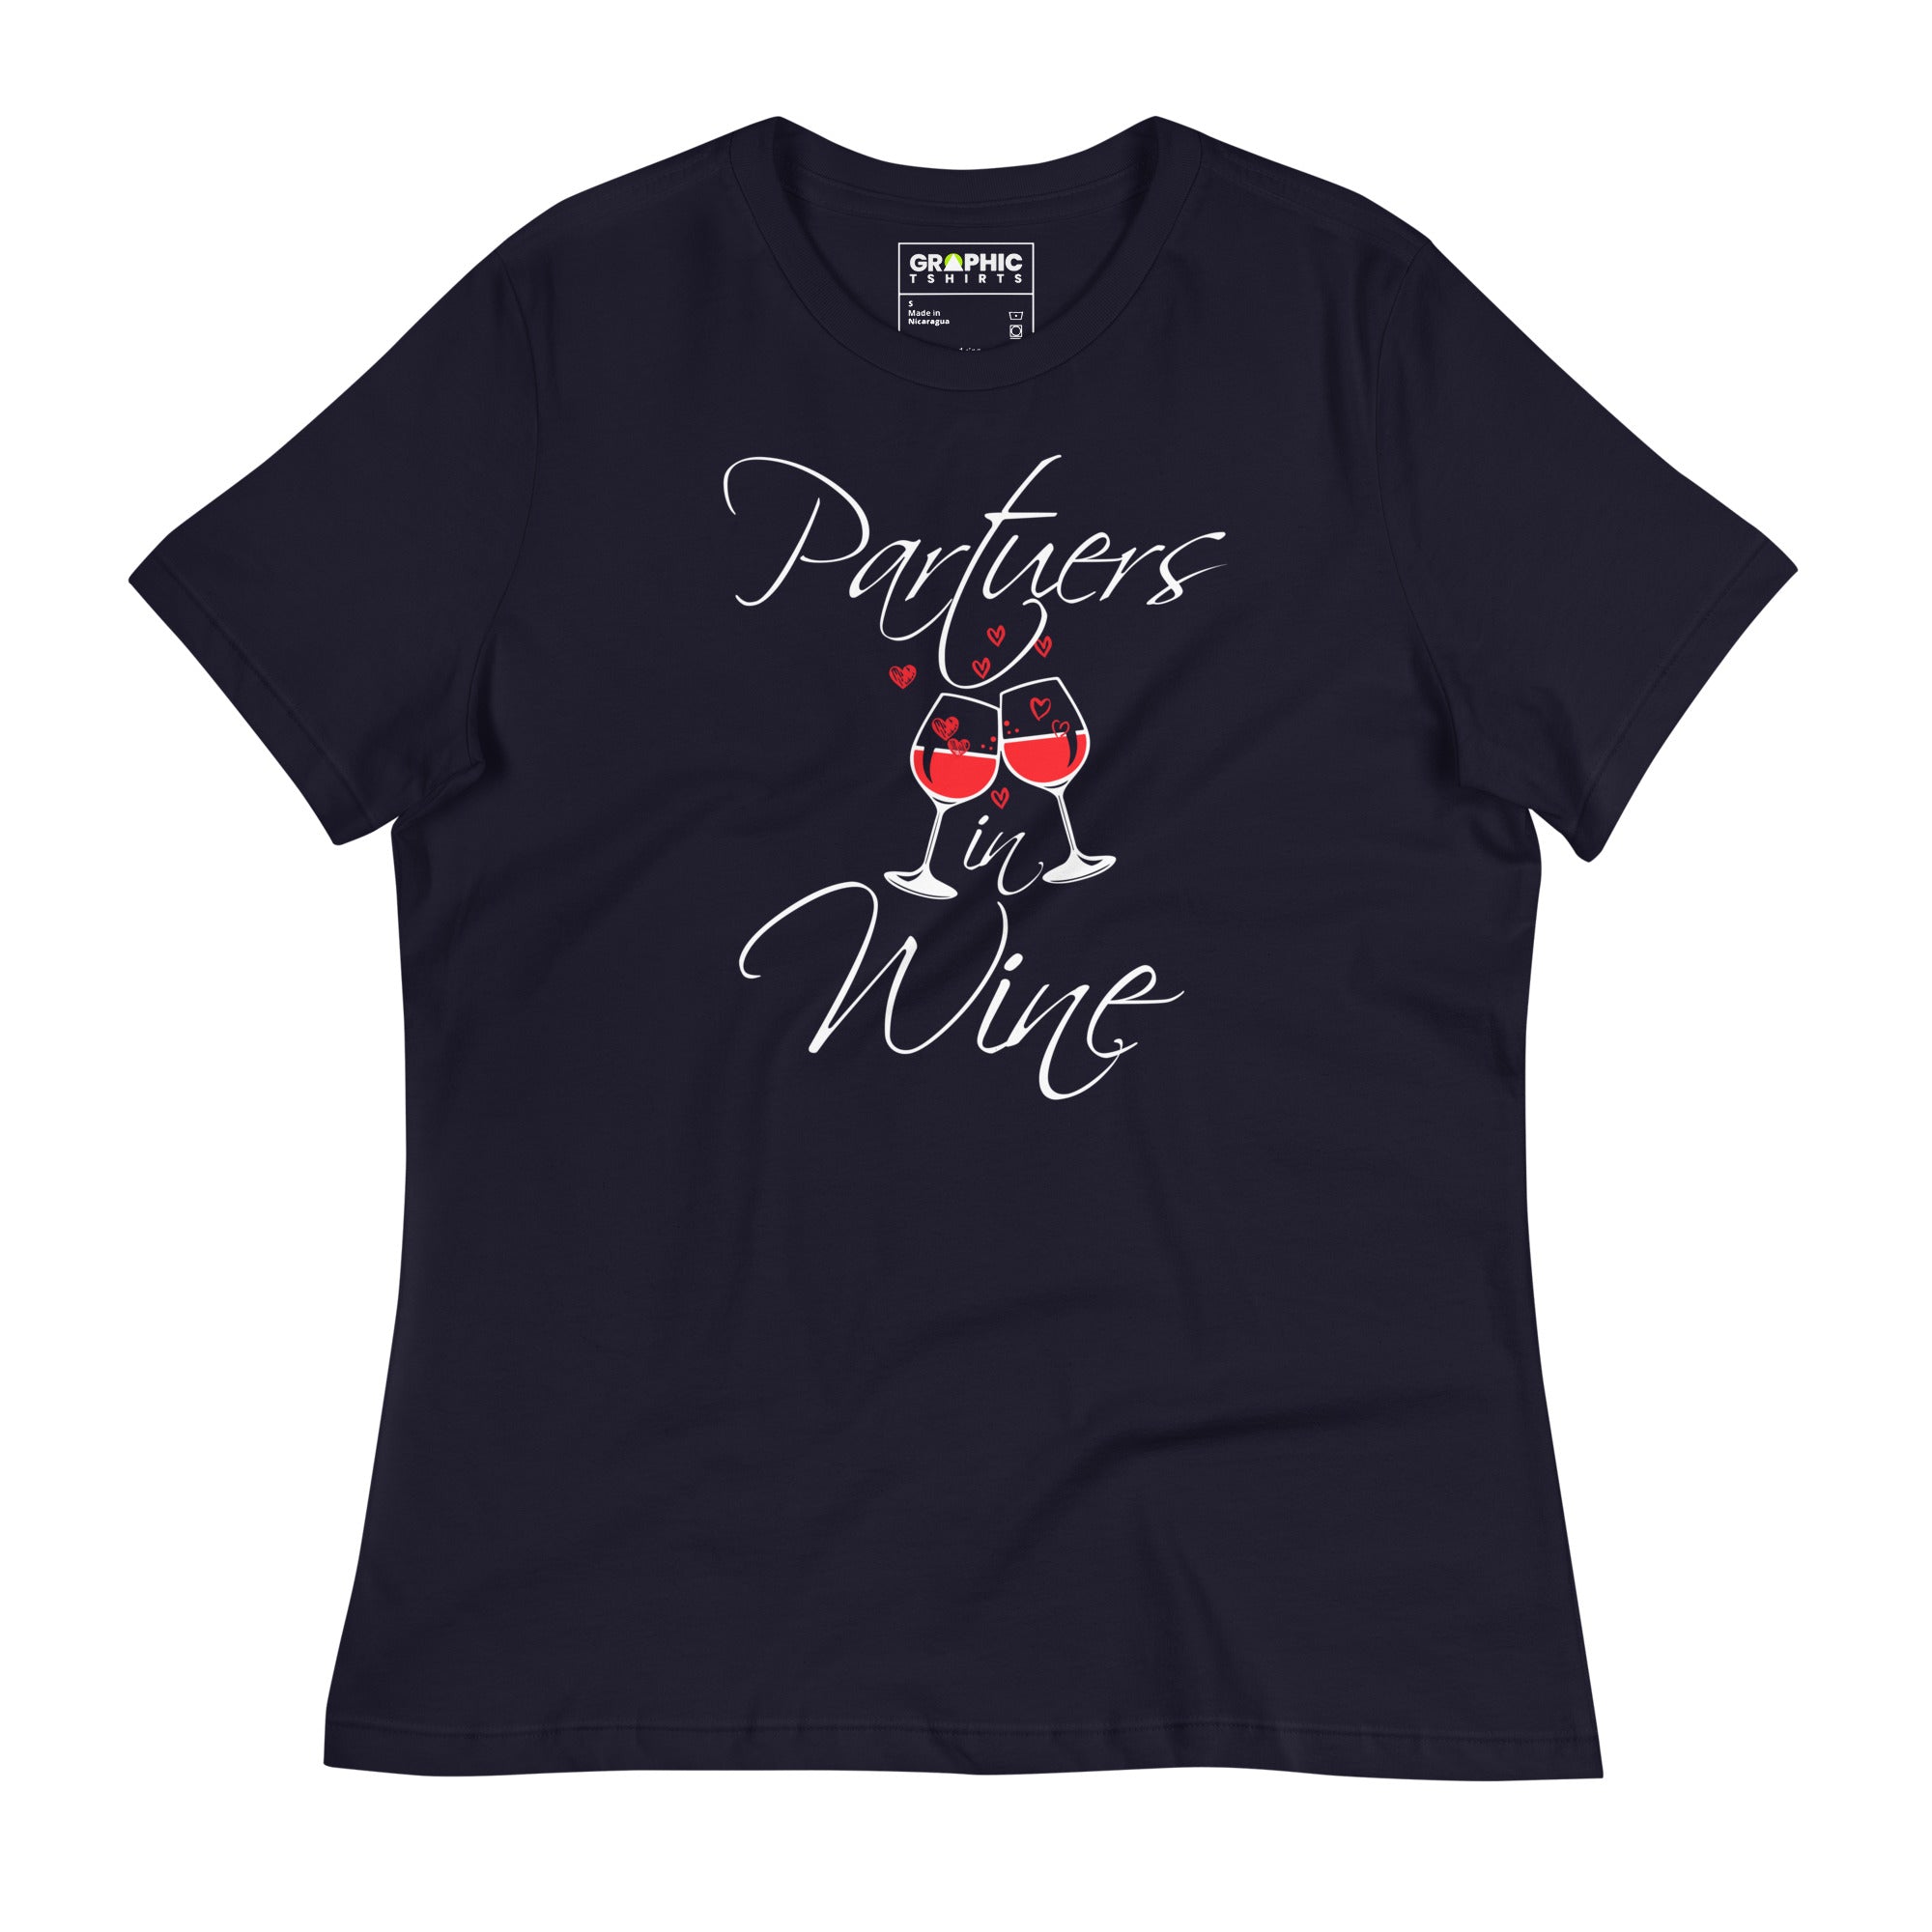 Women's Relaxed T-Shirt - Partners in Wine - GRAPHIC T-SHIRTS